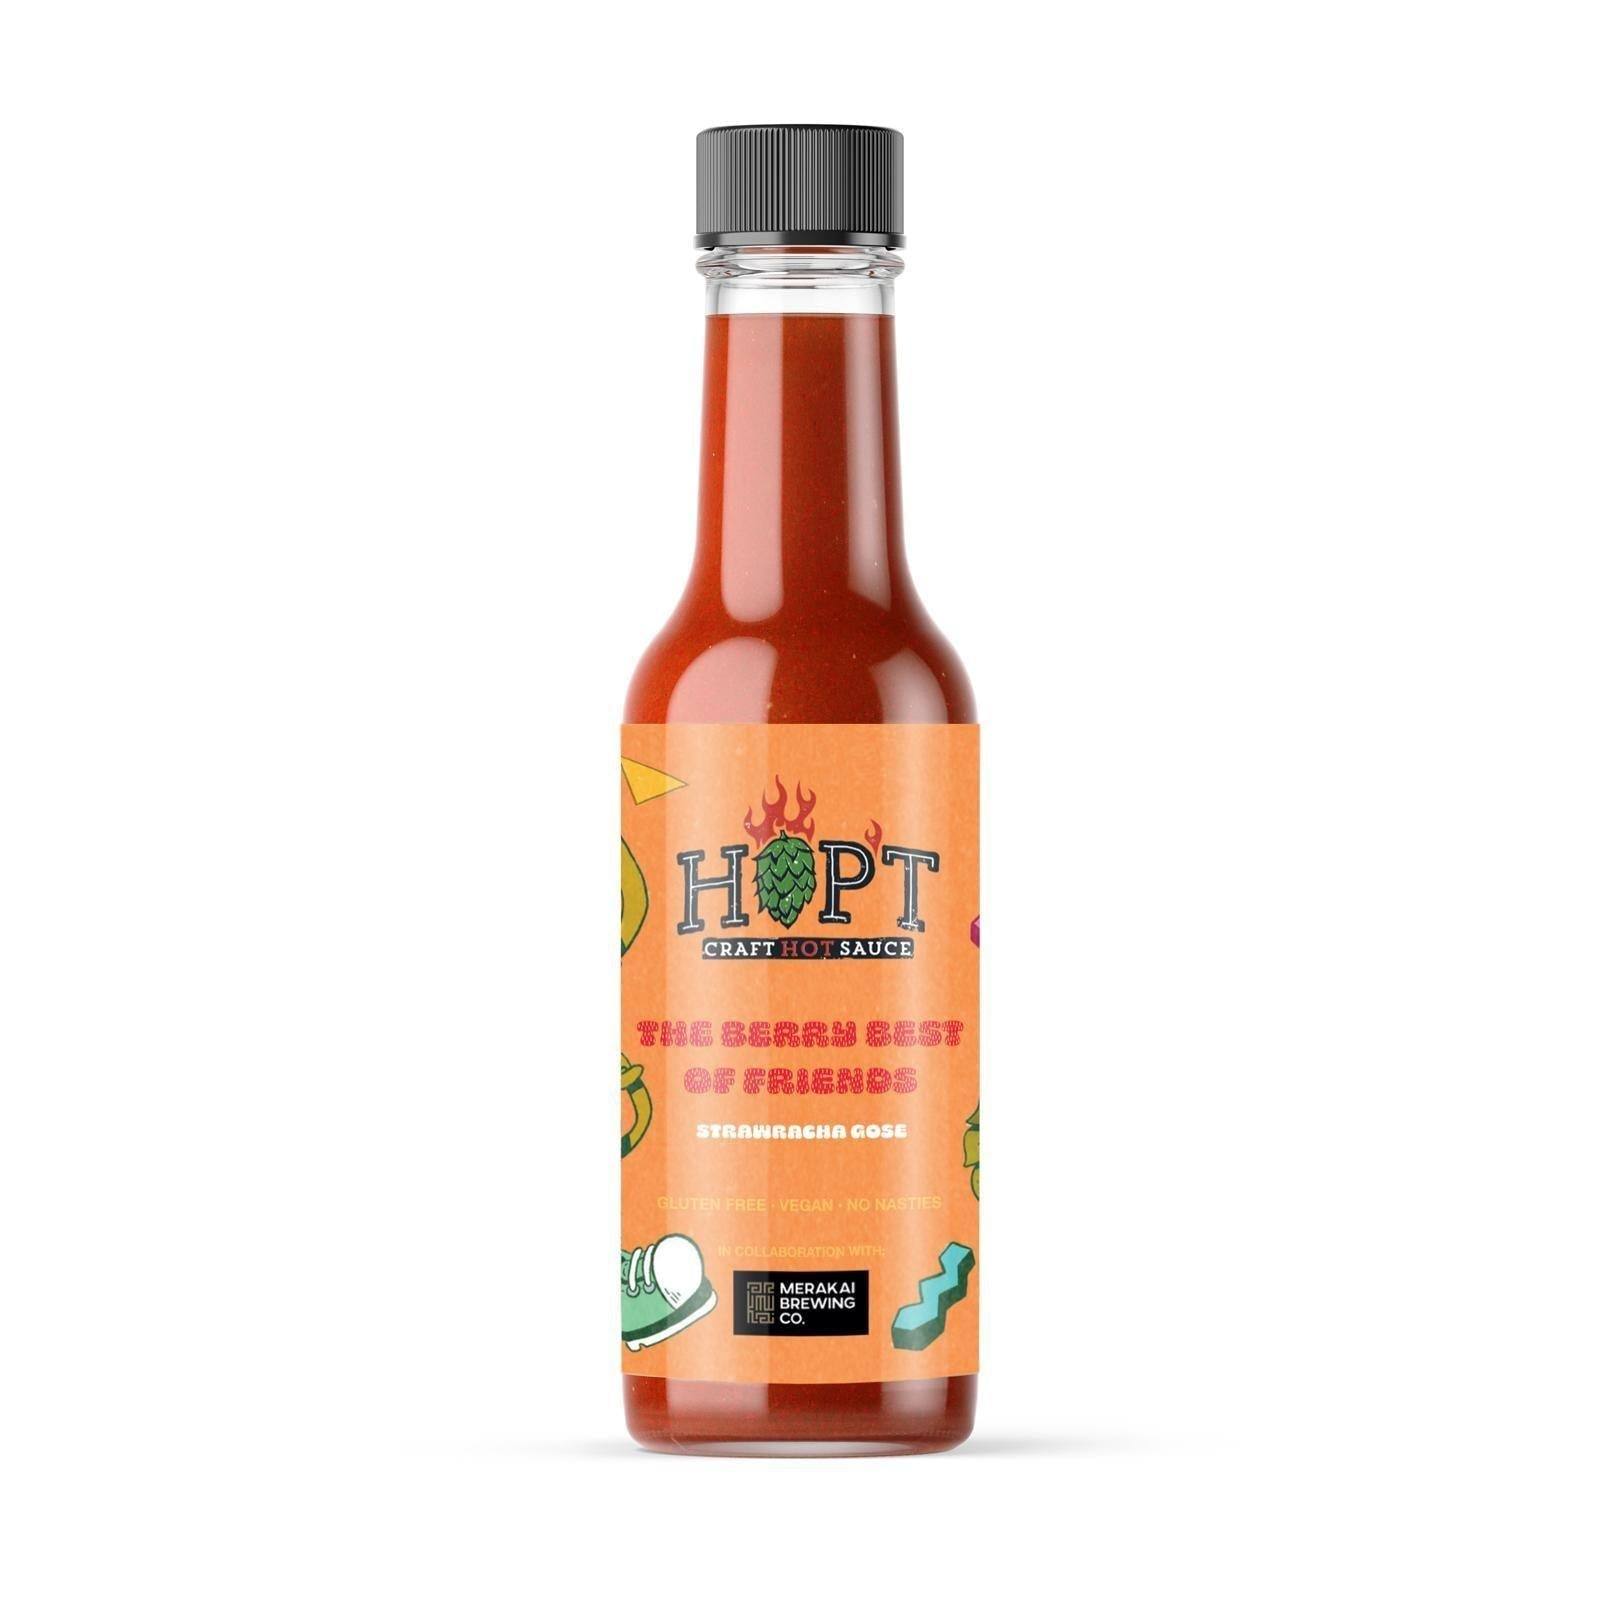 The Berry Best of Friends Strawracha Gose | 150ml | Hopt Sauce - One Stop Chilli Shop